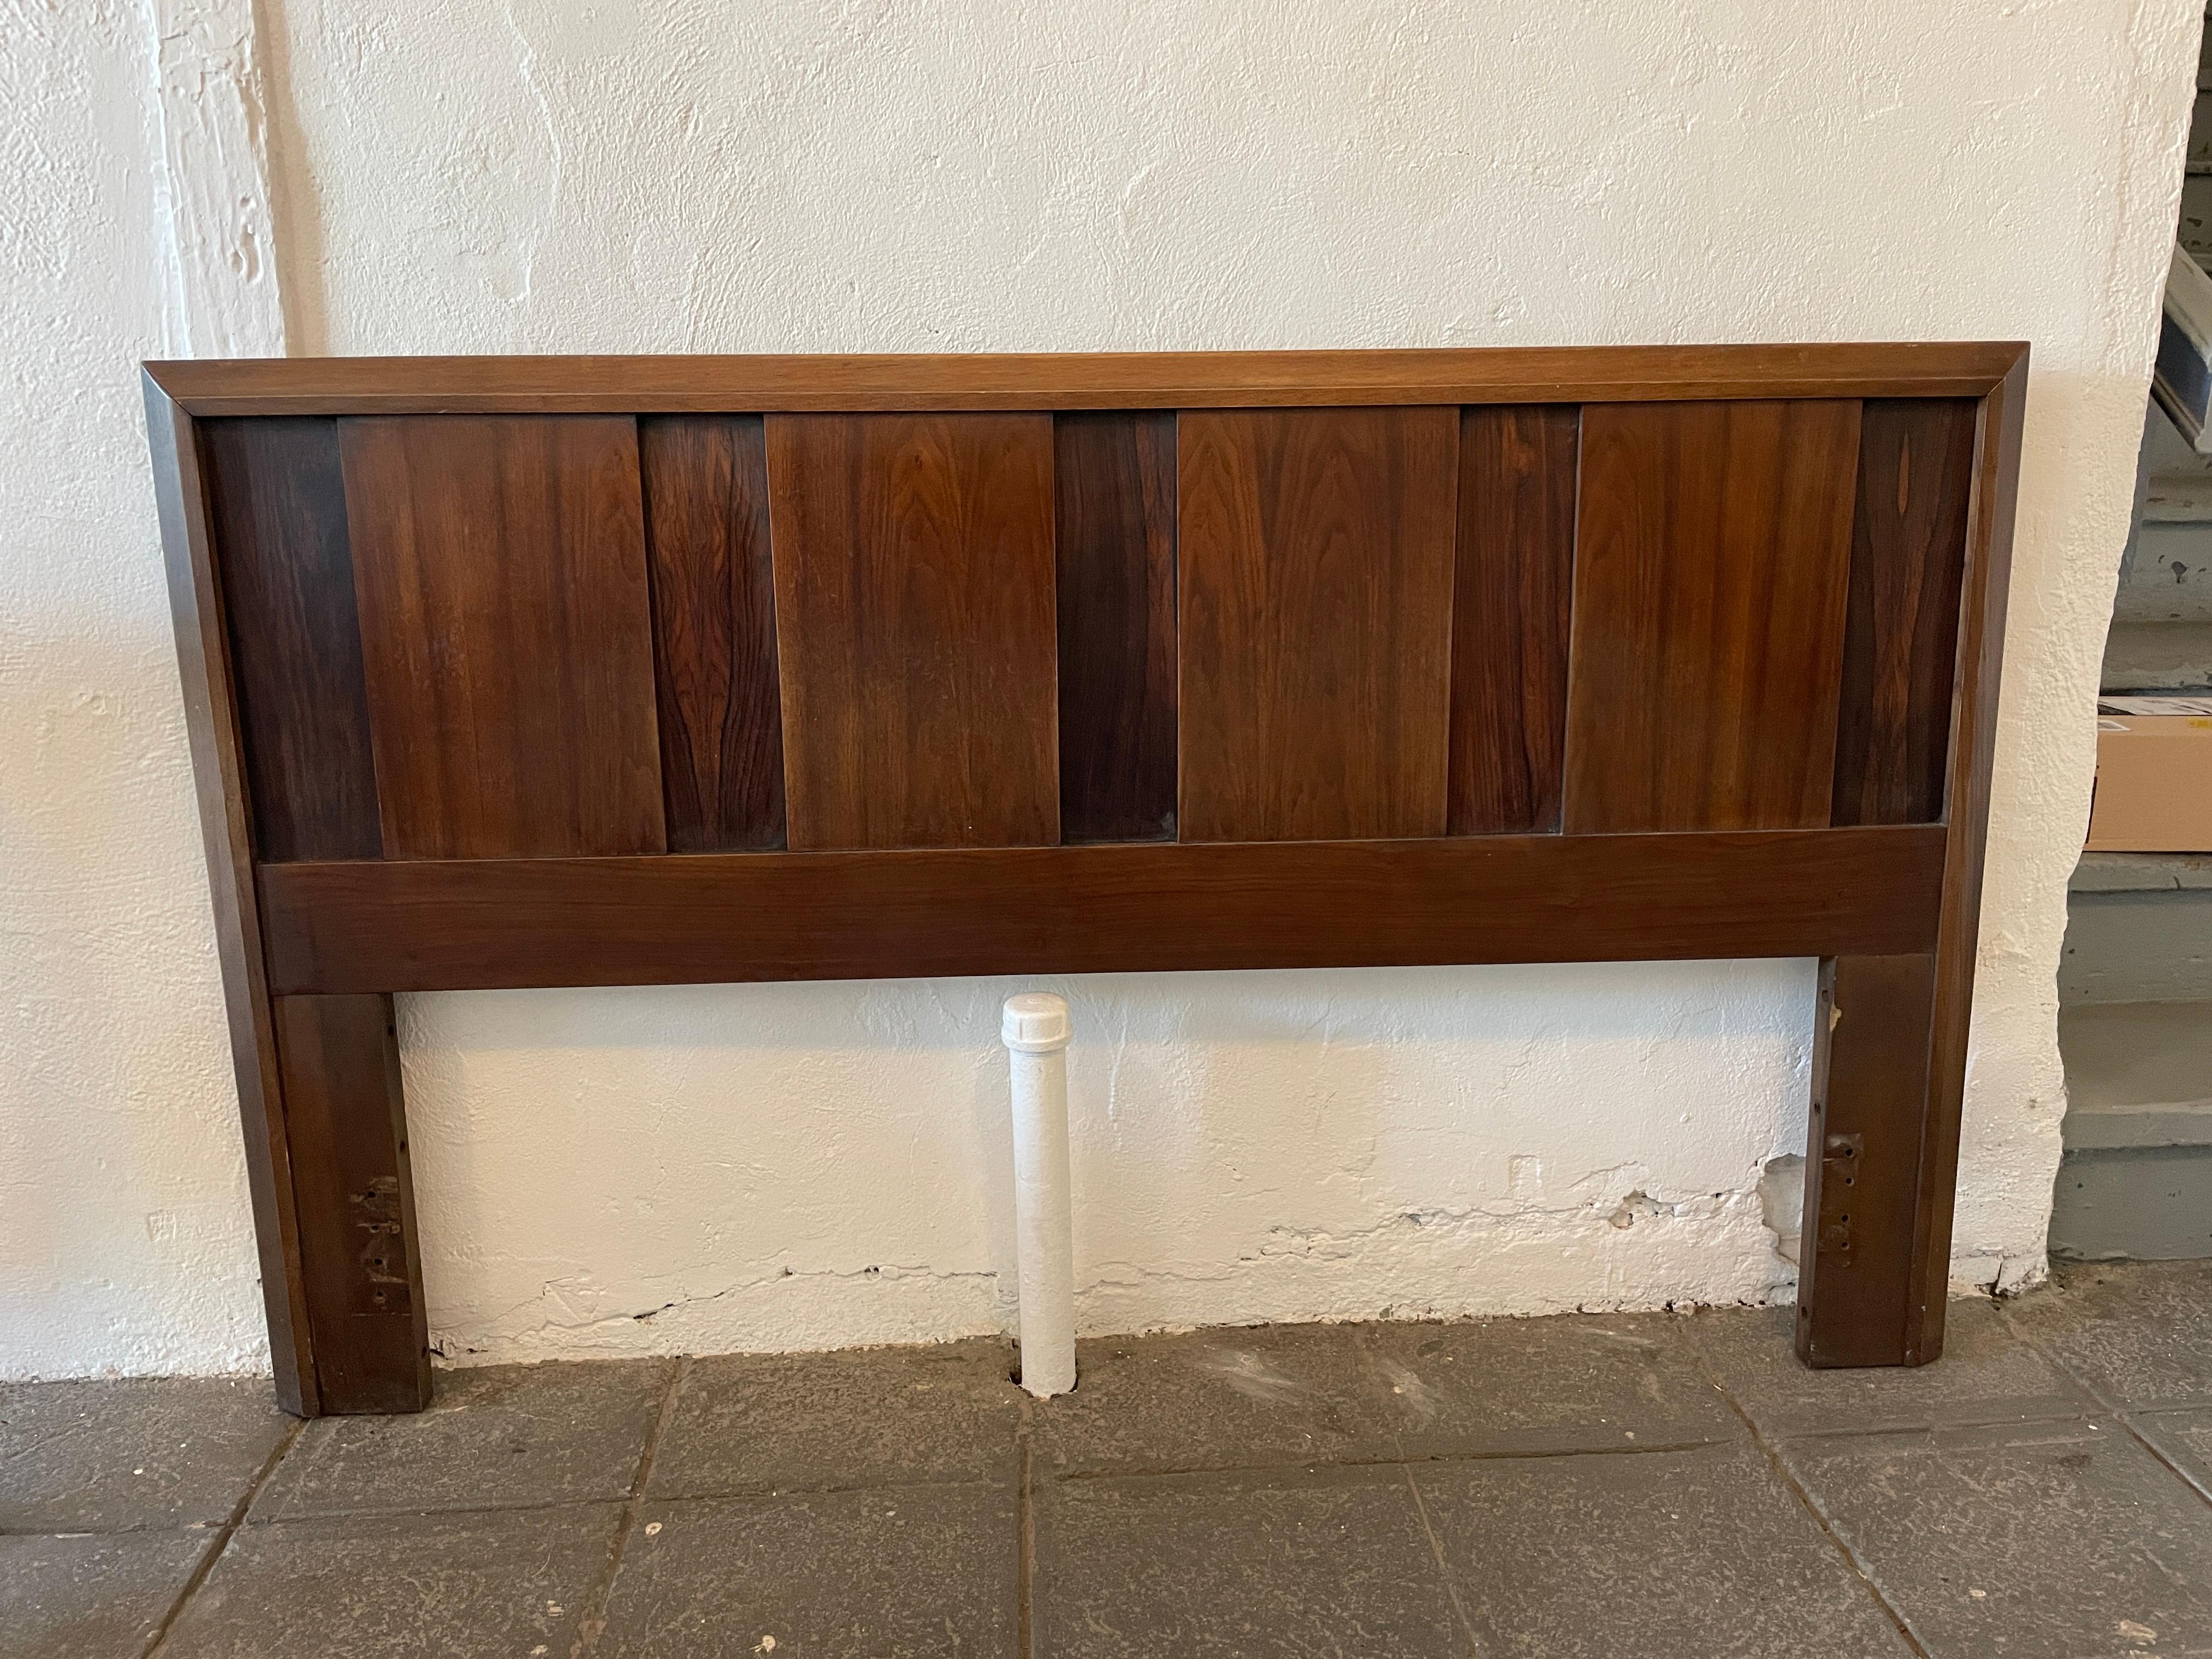 Beautiful mid-century queen headboard made in usa in wonderful condition. Really nice walnut grain wood headboard with wood details. Fits a queen sized mattress. Bed headboard only no metal bed frame. Easily mounts to all bed frames.

Measures: 60